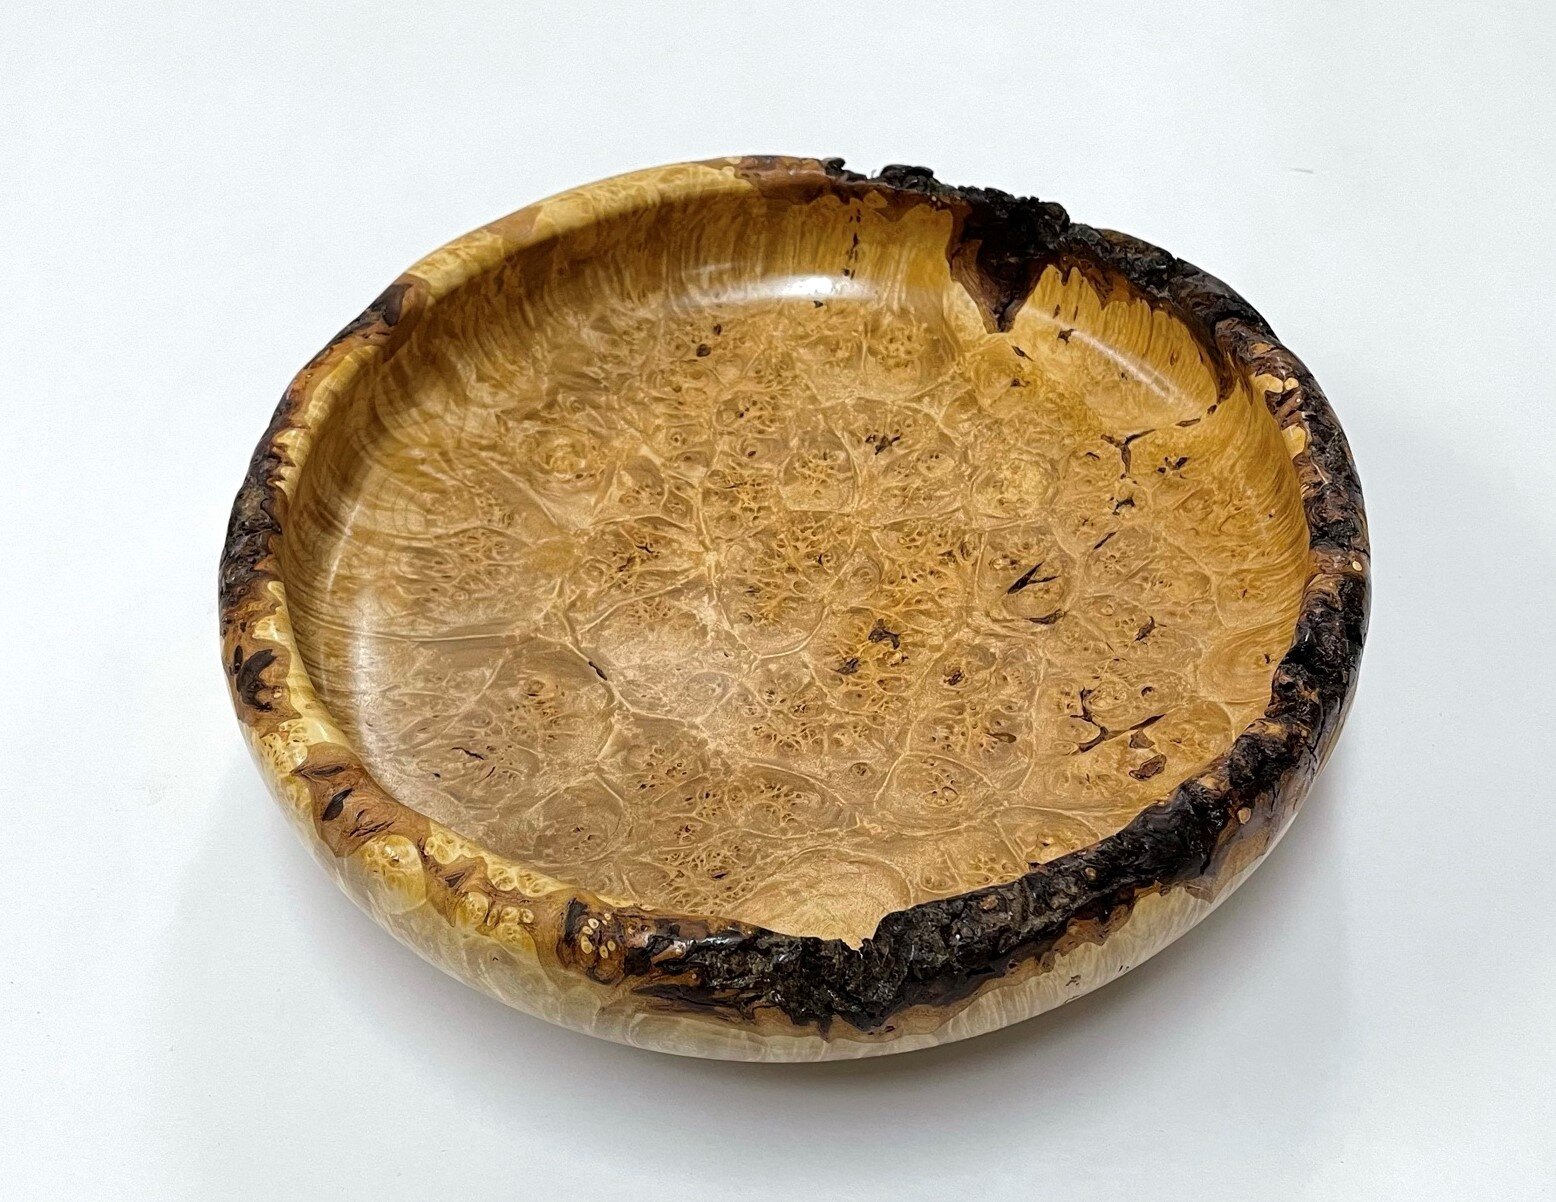  A live bark edge on a burl enhances the bowl when it is maintained while turning.  Big Leaf Maple Burl Bowl 10” x 3” high $250 